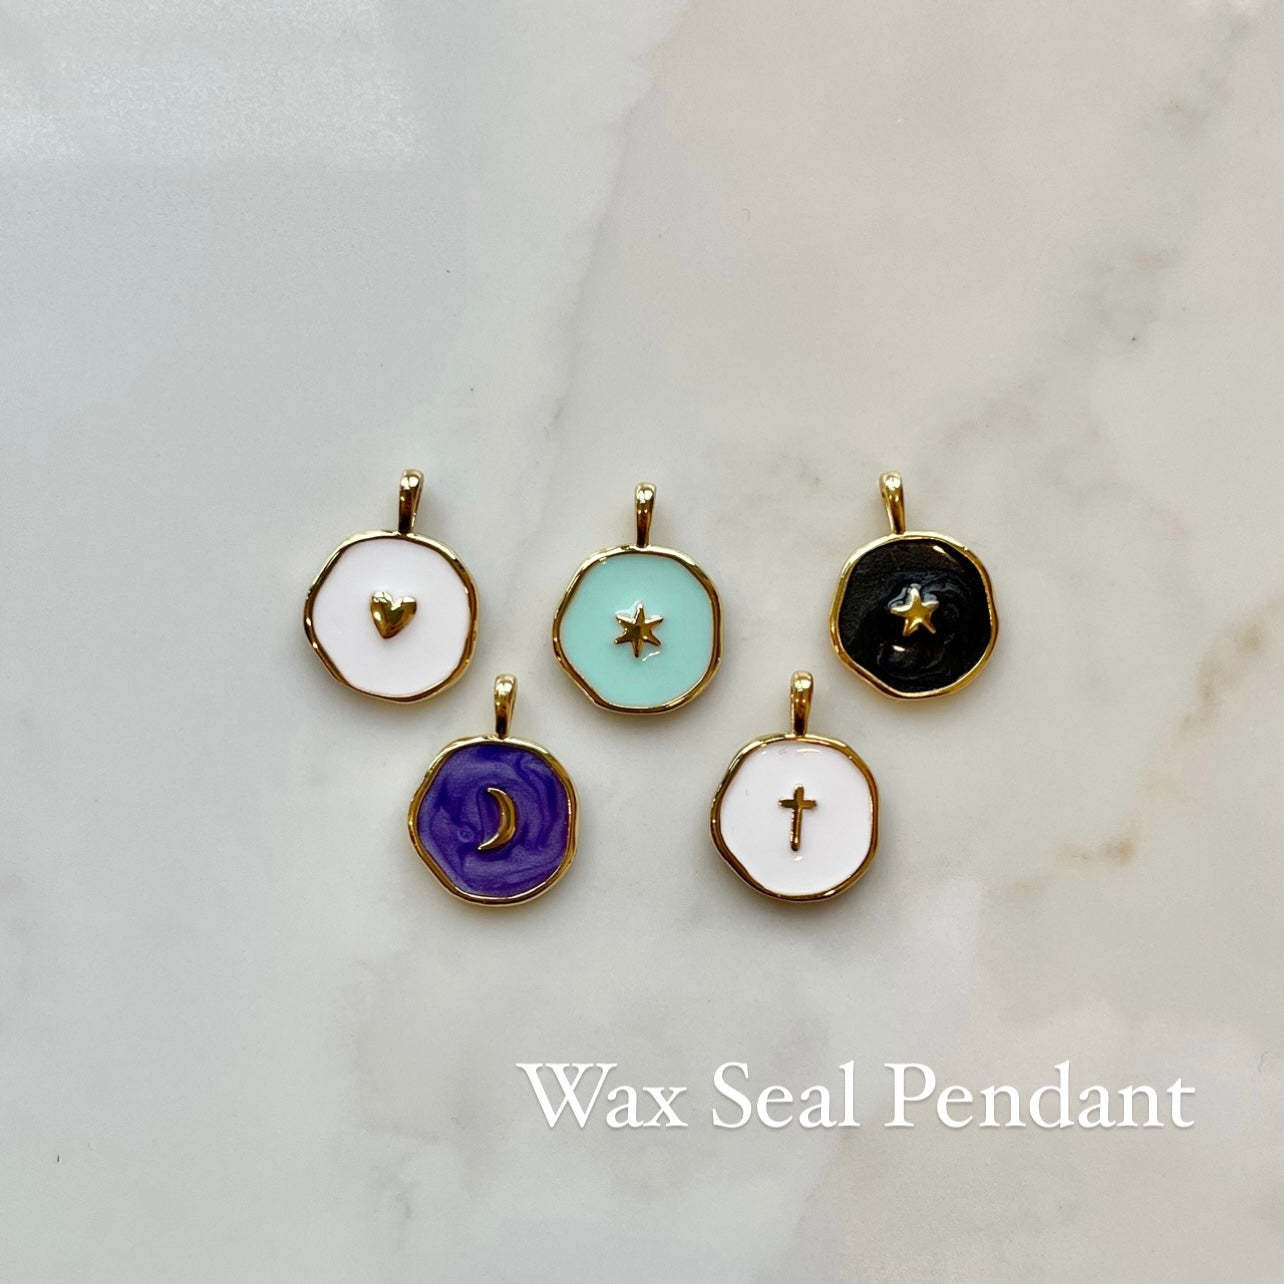 Wax Seal Pendant for the Necklace Kit